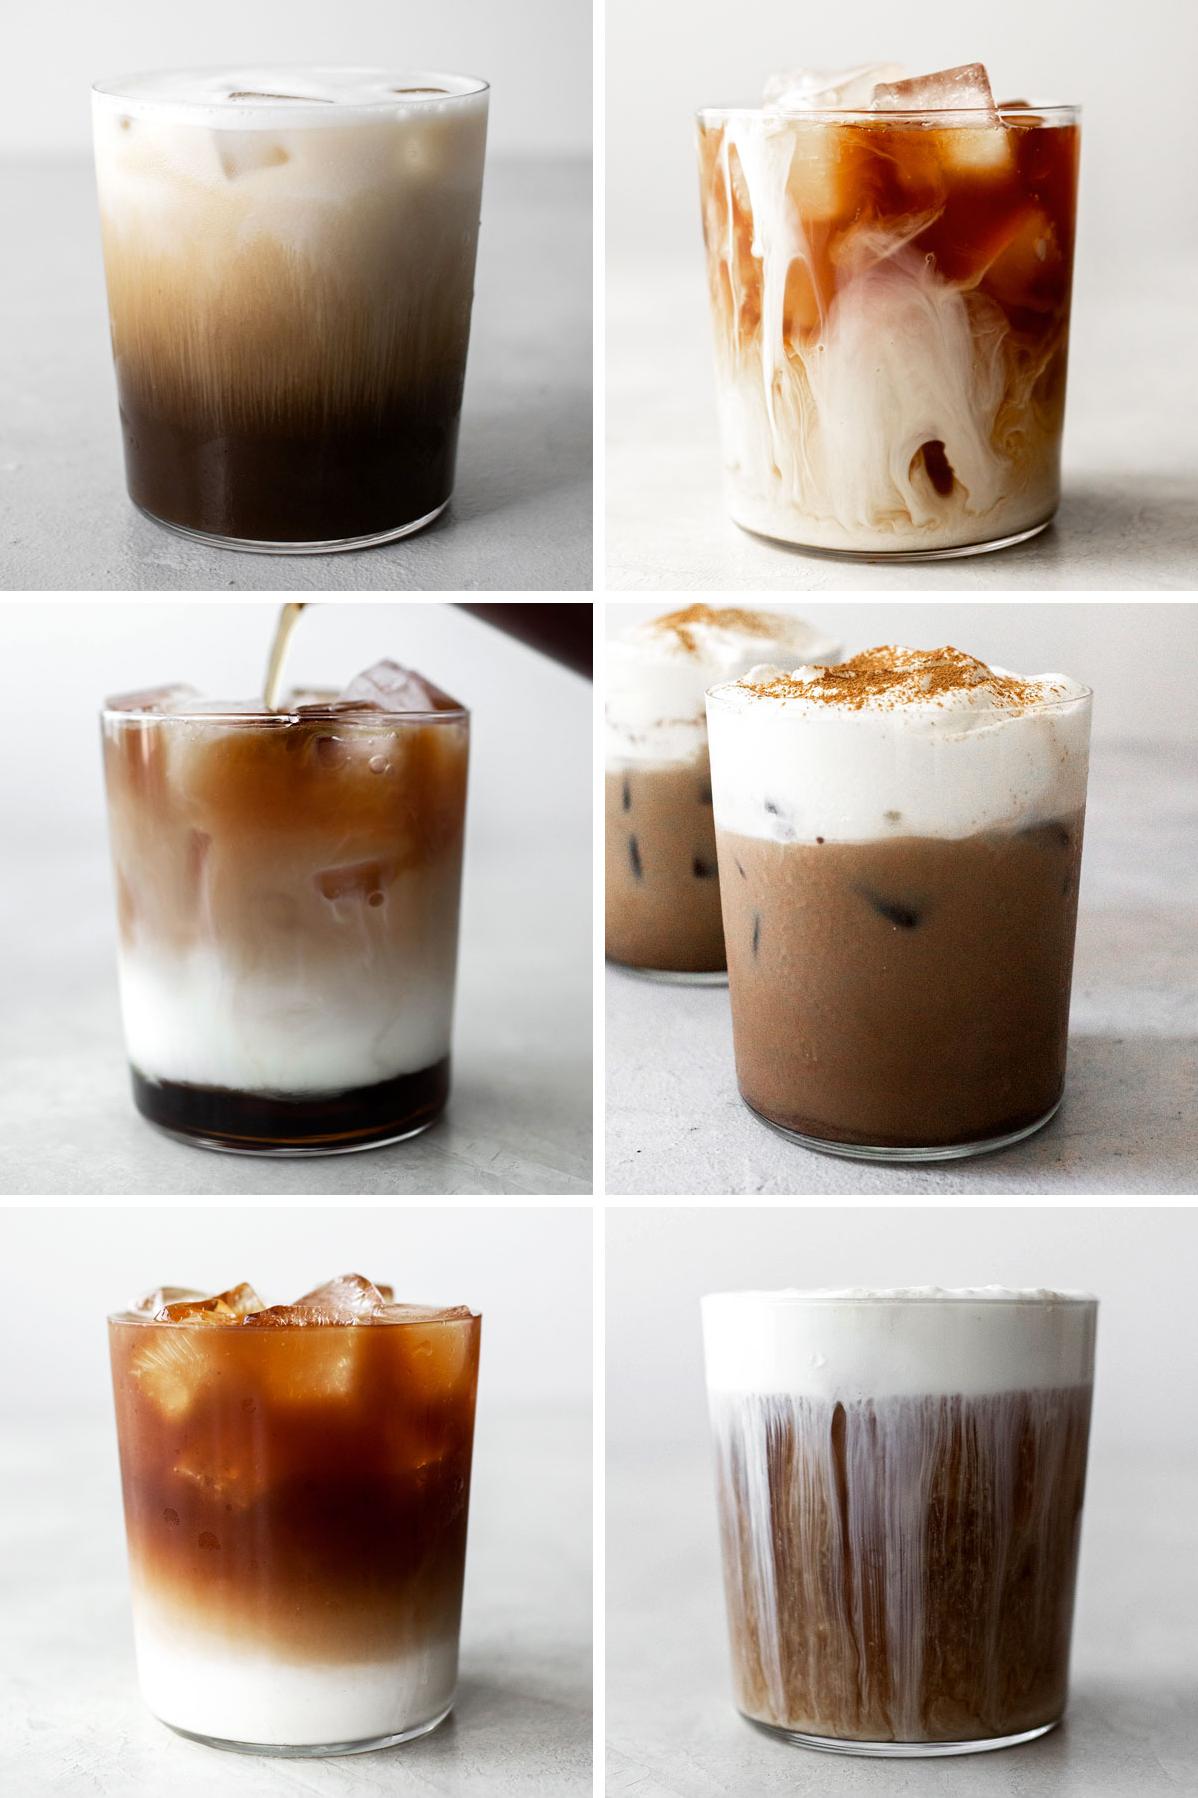  Sweeten up your day with this cold coffee recipe